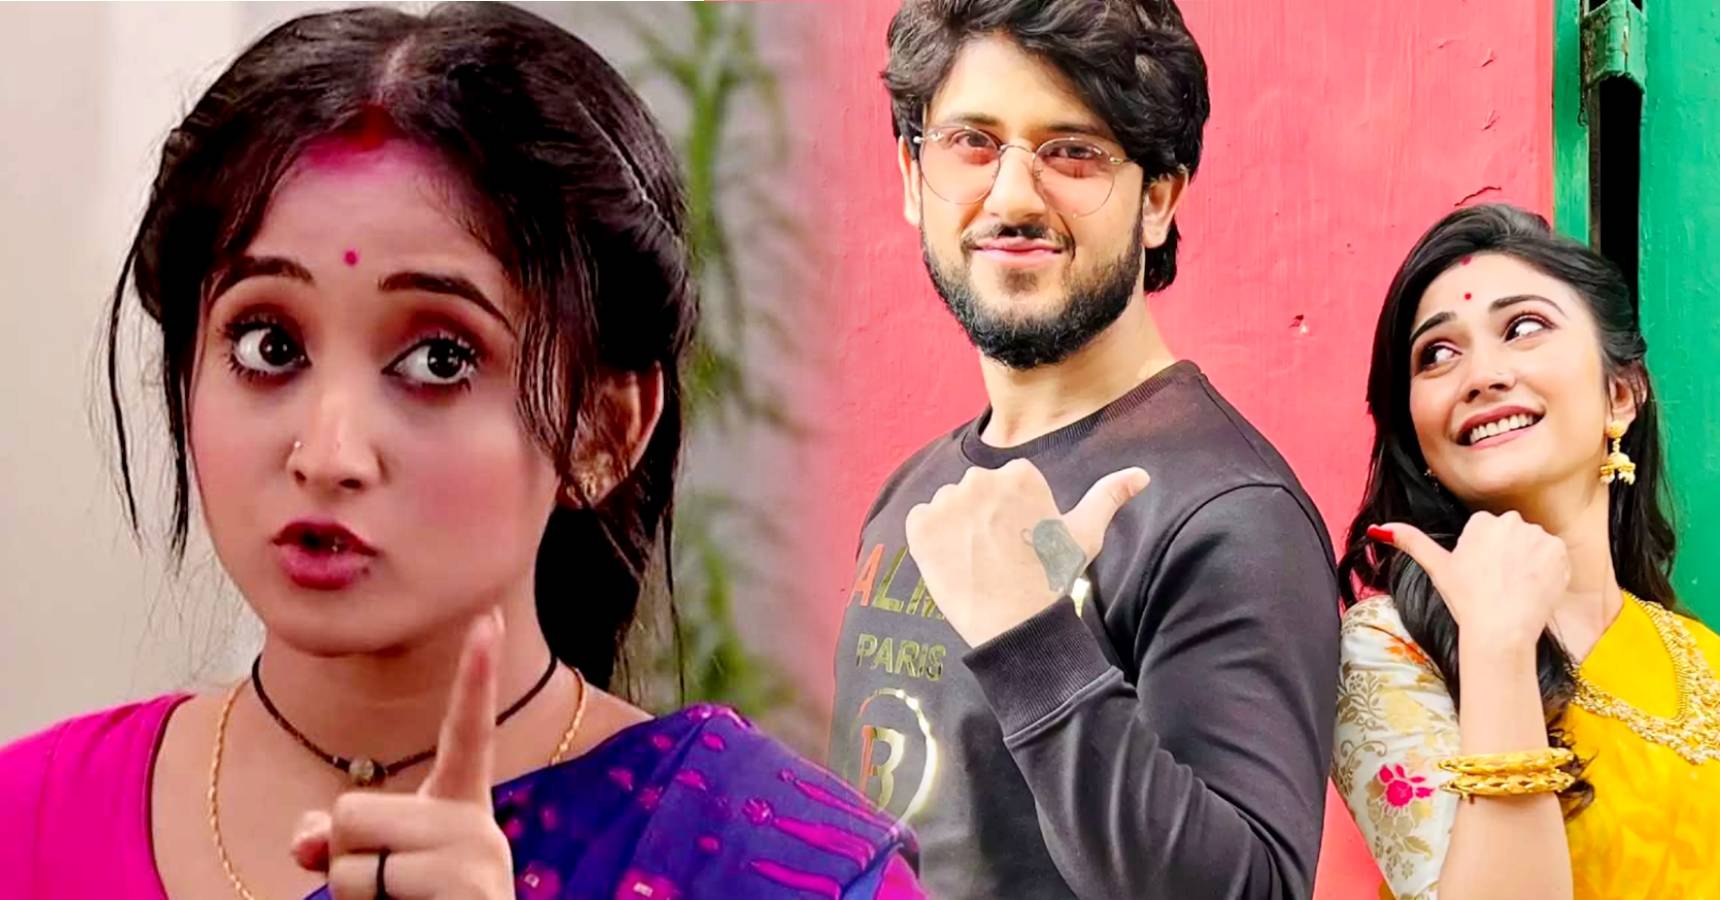 Adrit Roy confirms he has a girlfriend, Soumitrisha Kundu gets angry as fans linked him with her